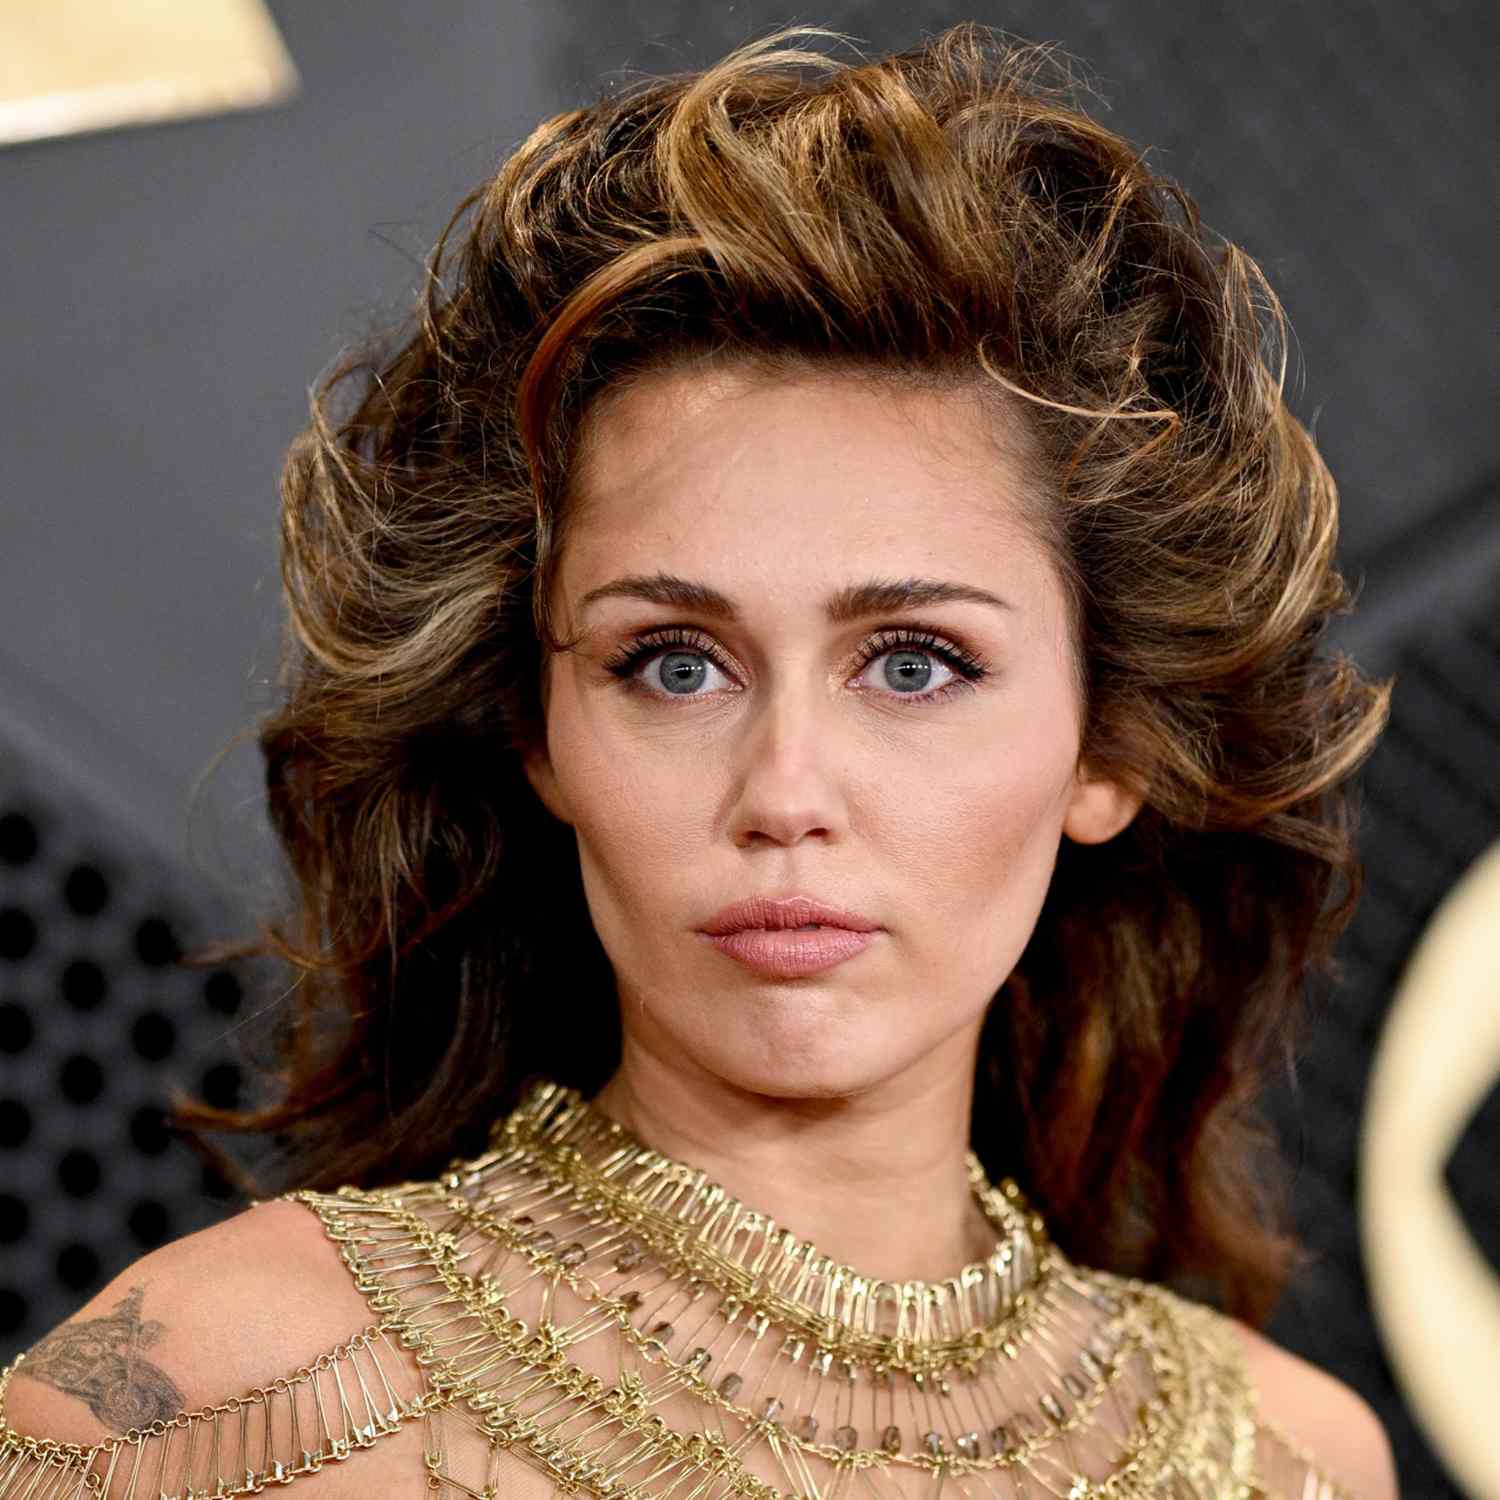 Miley Cyrus with fluffy, brushed back hair on the red carpet